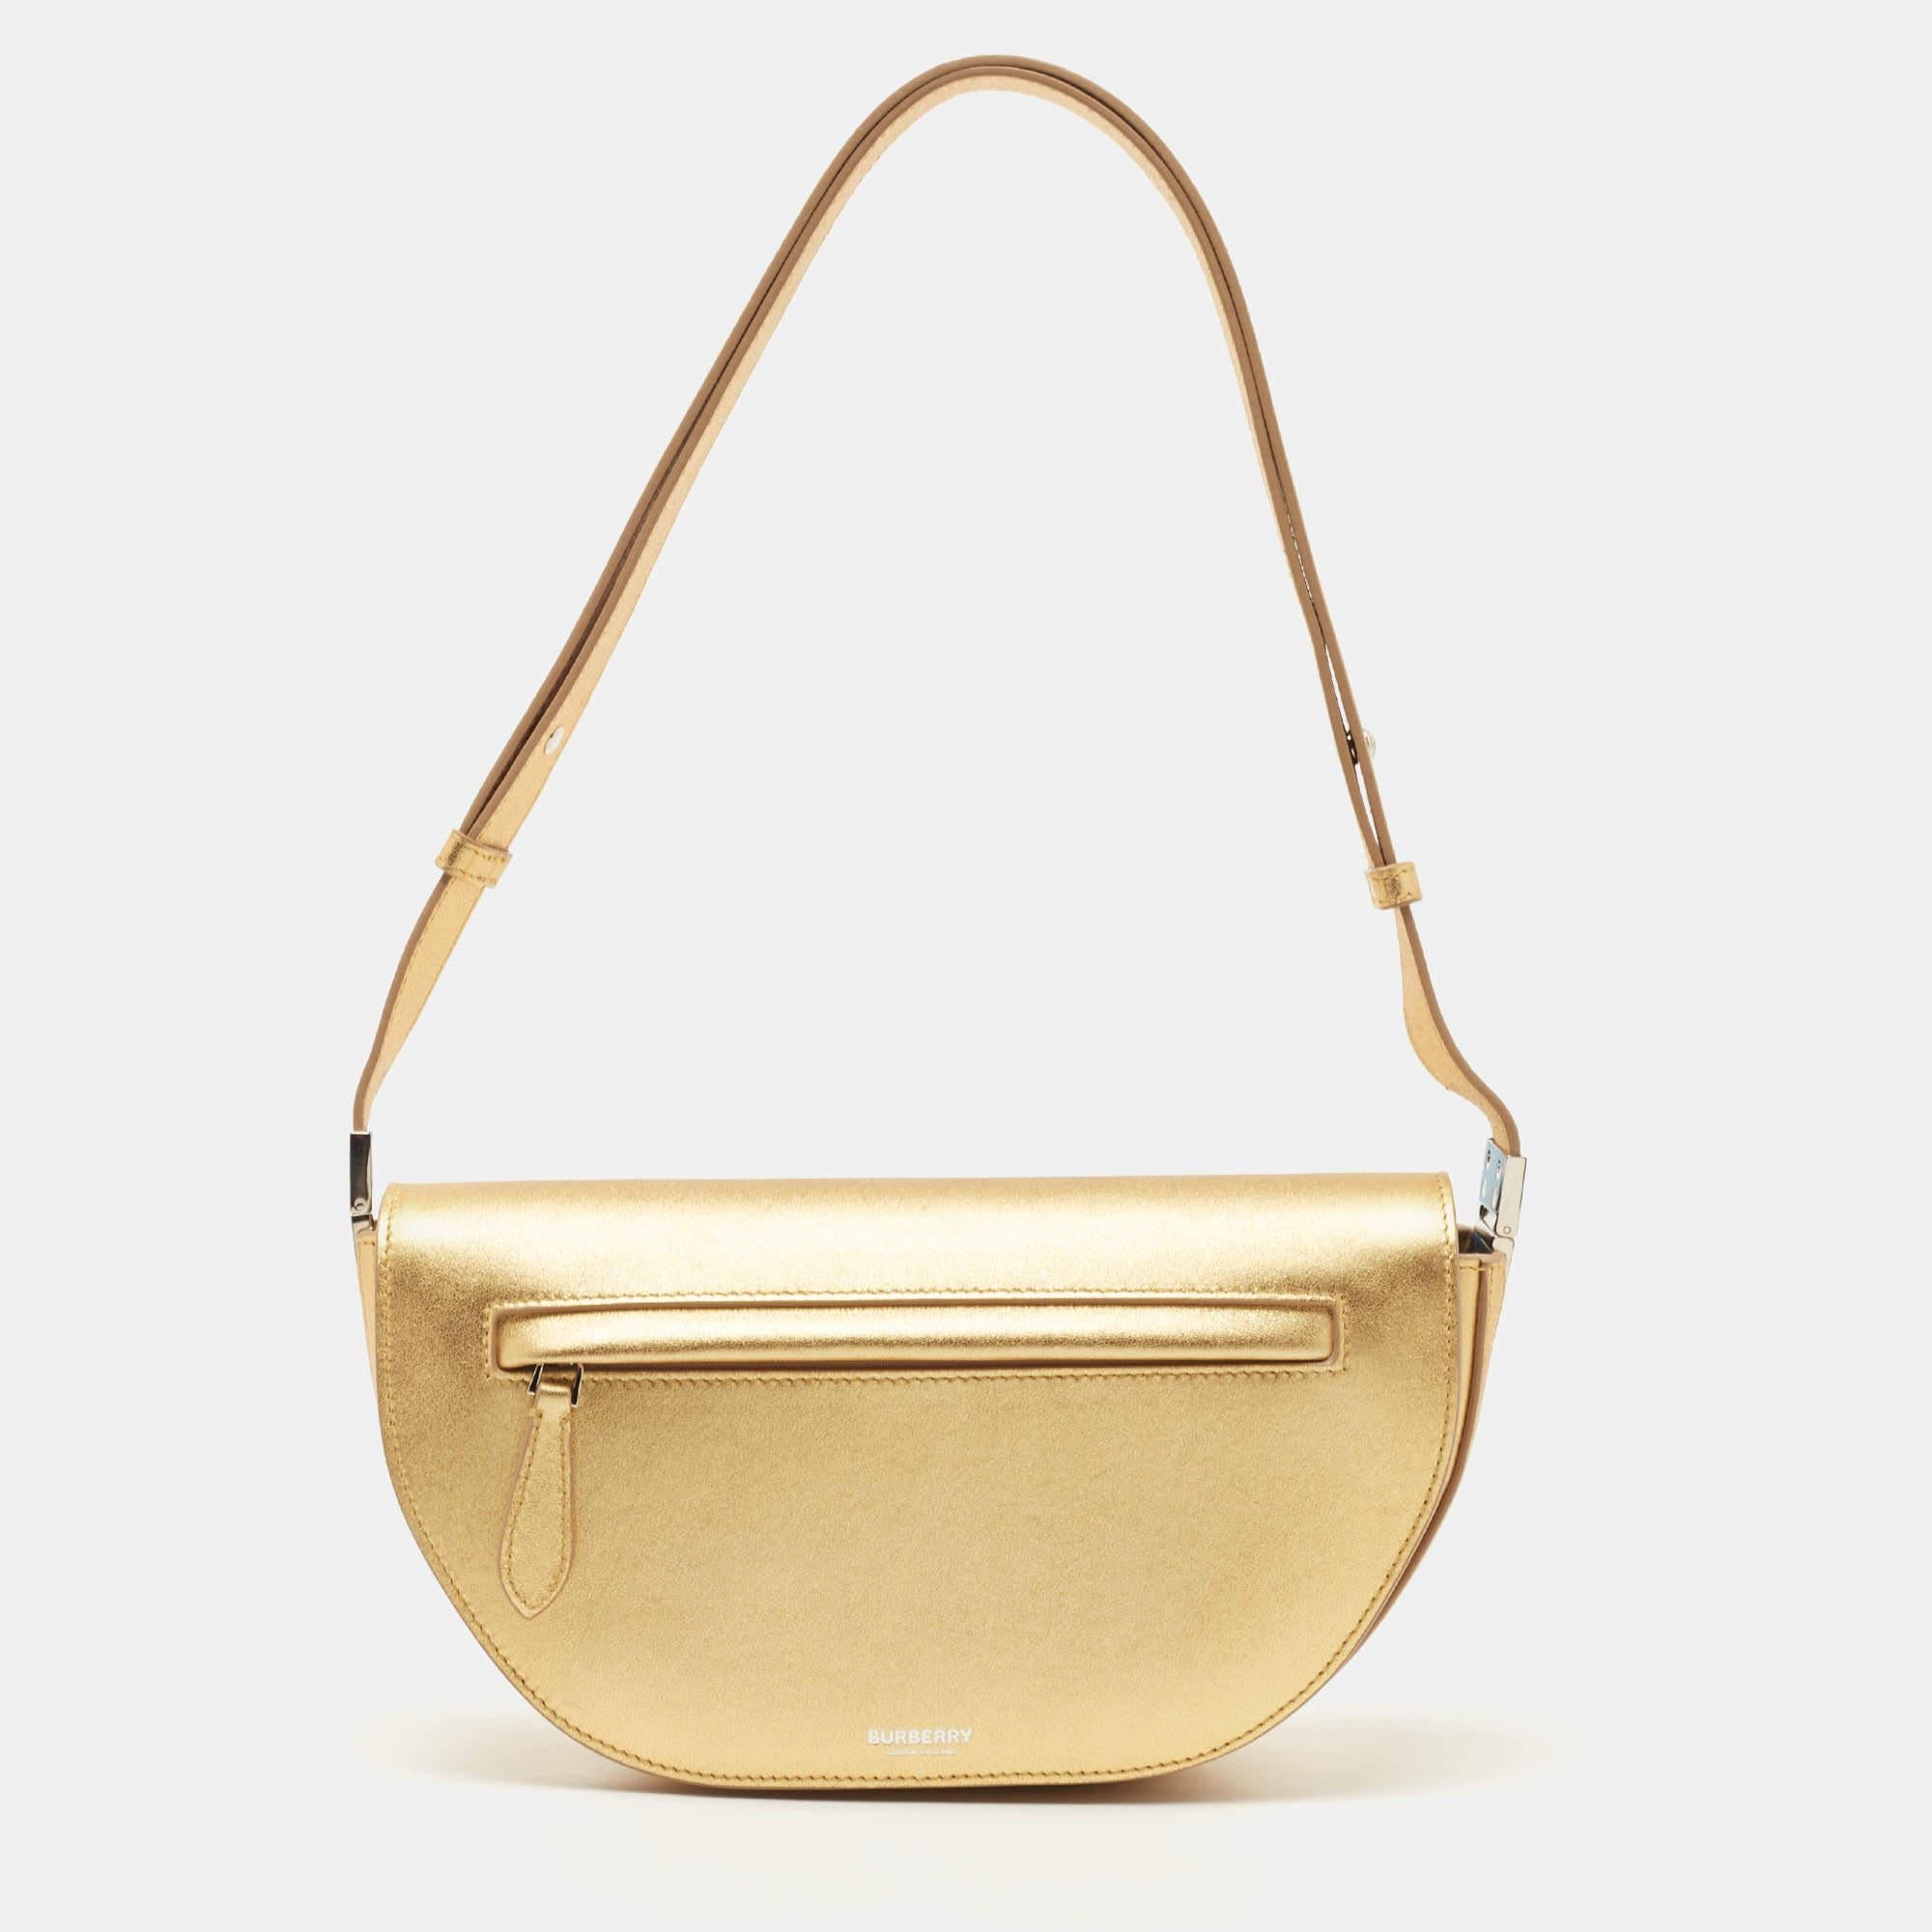 Burberry Gold Leather Small Olympia Shoulder Bag 9